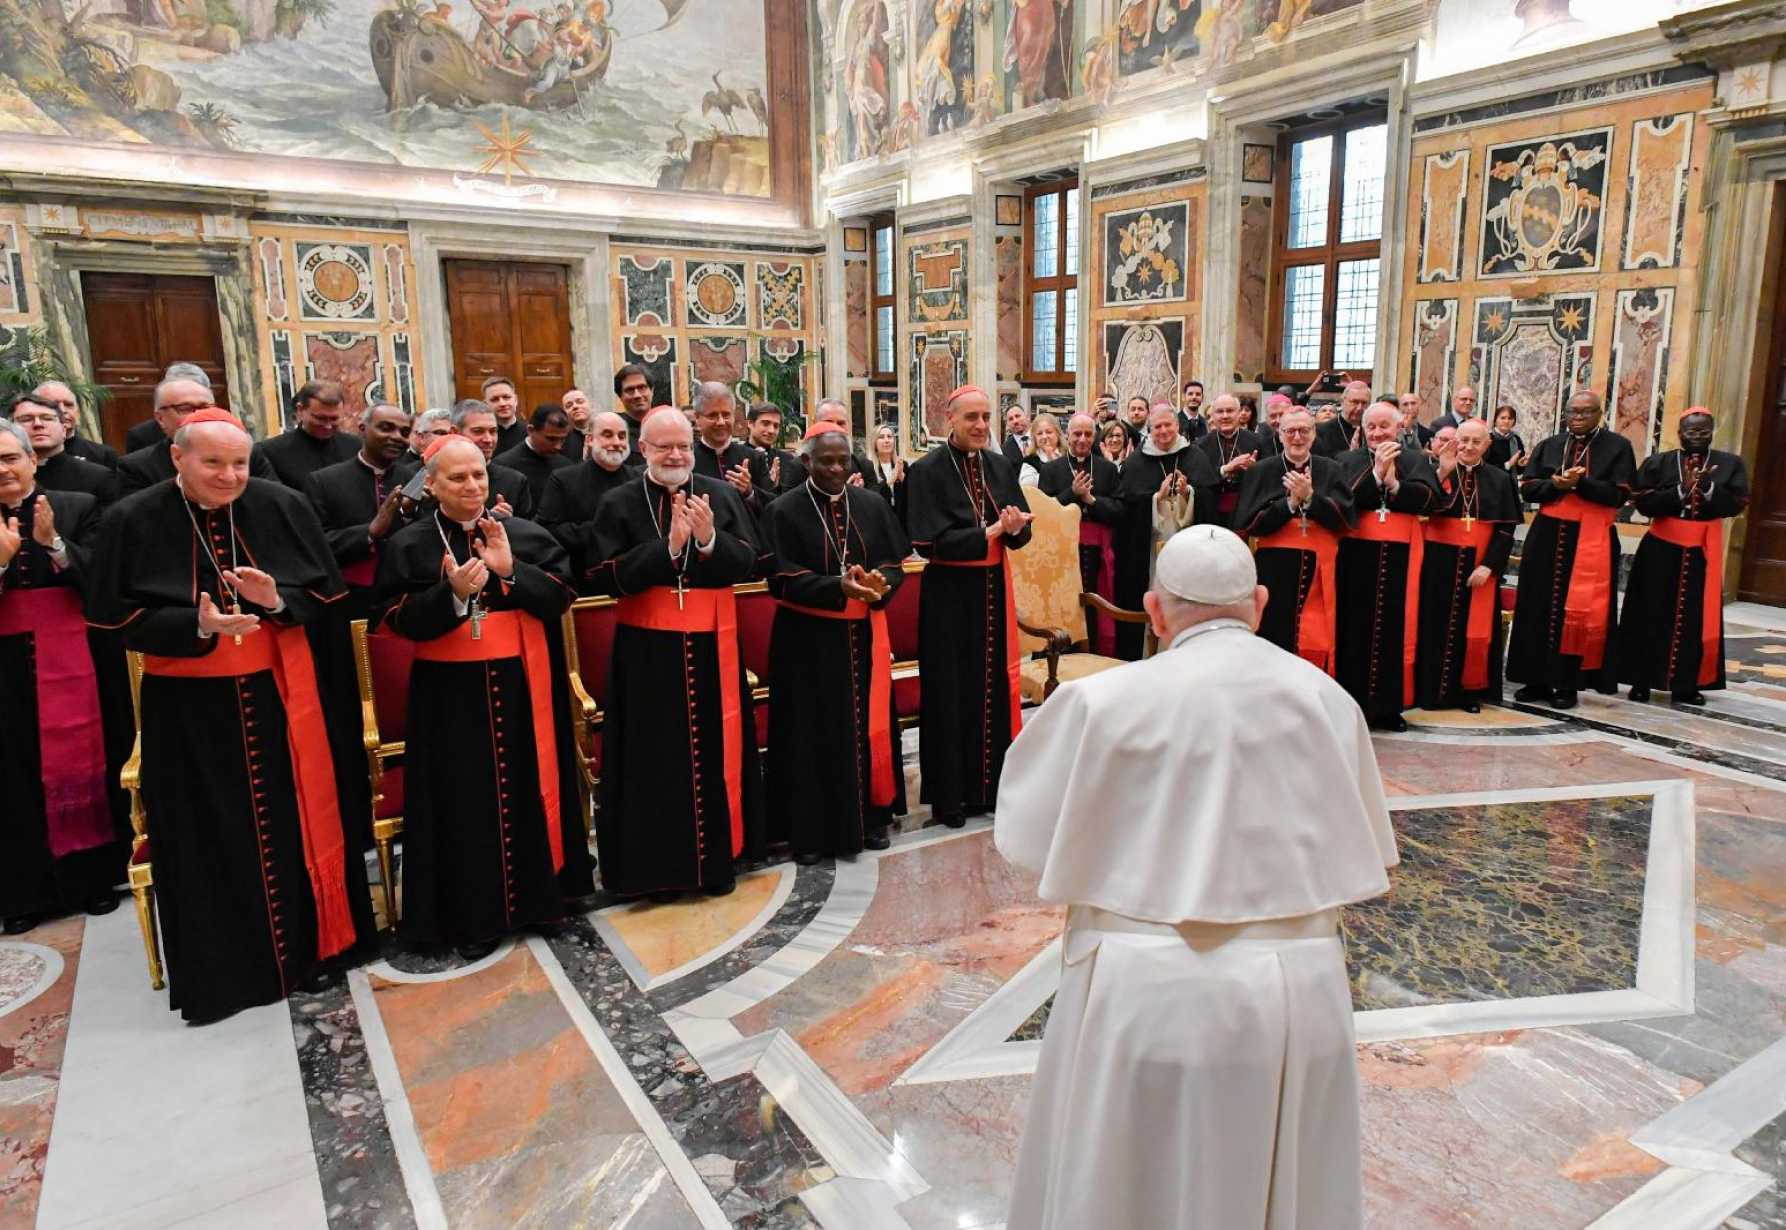 Blessings are signs of church's closeness, pope says